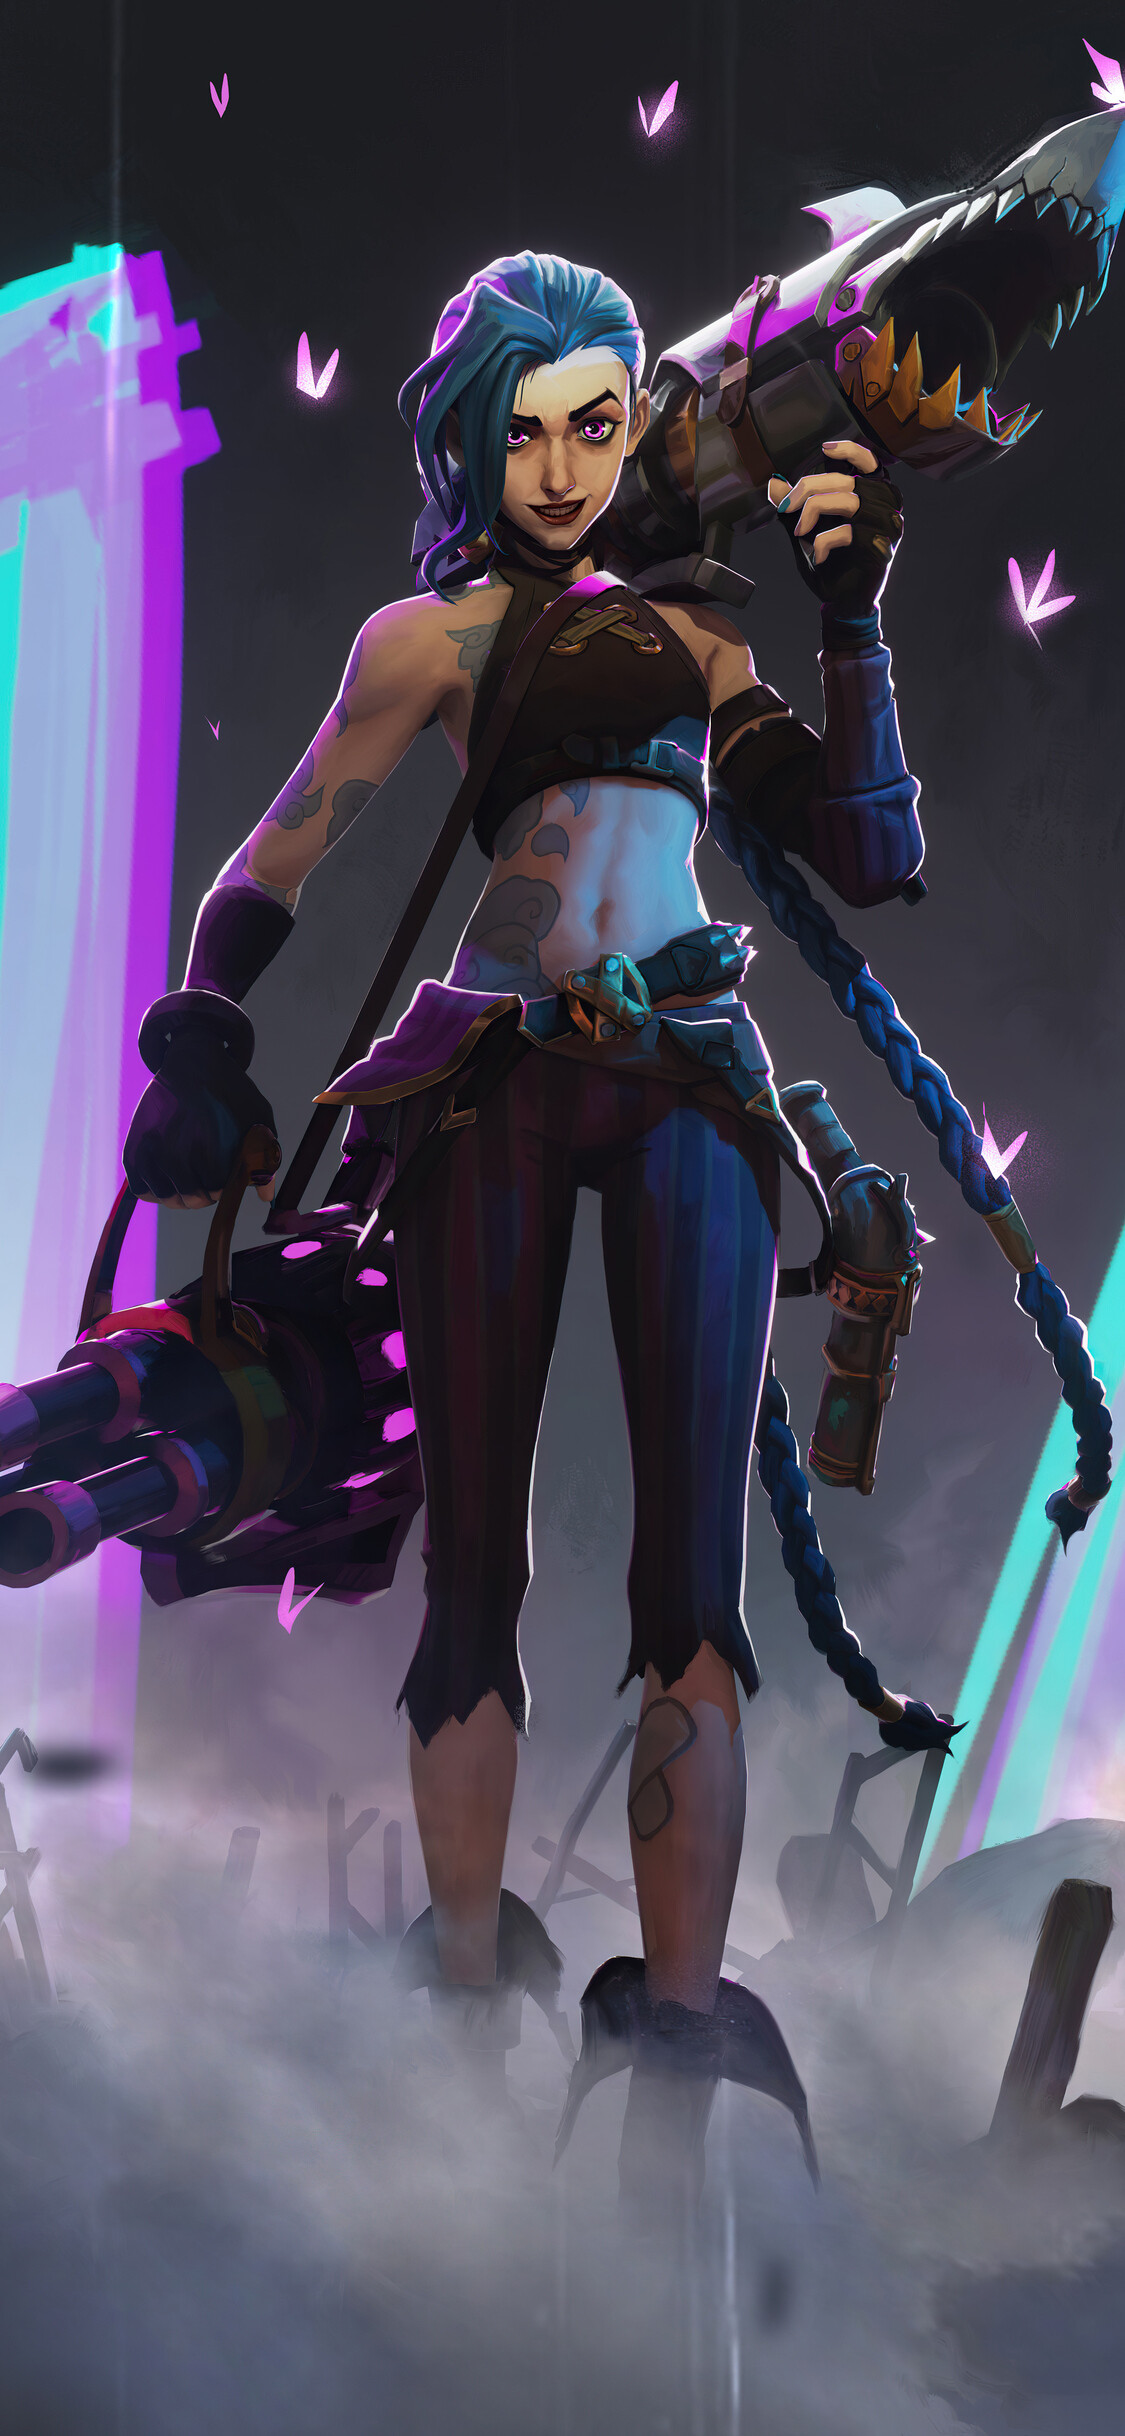 Arcane: League of Legends: It centers on the origin story of two of League of Legends' most iconic characters: Jinx and her sister Vi. 1130x2440 HD Wallpaper.